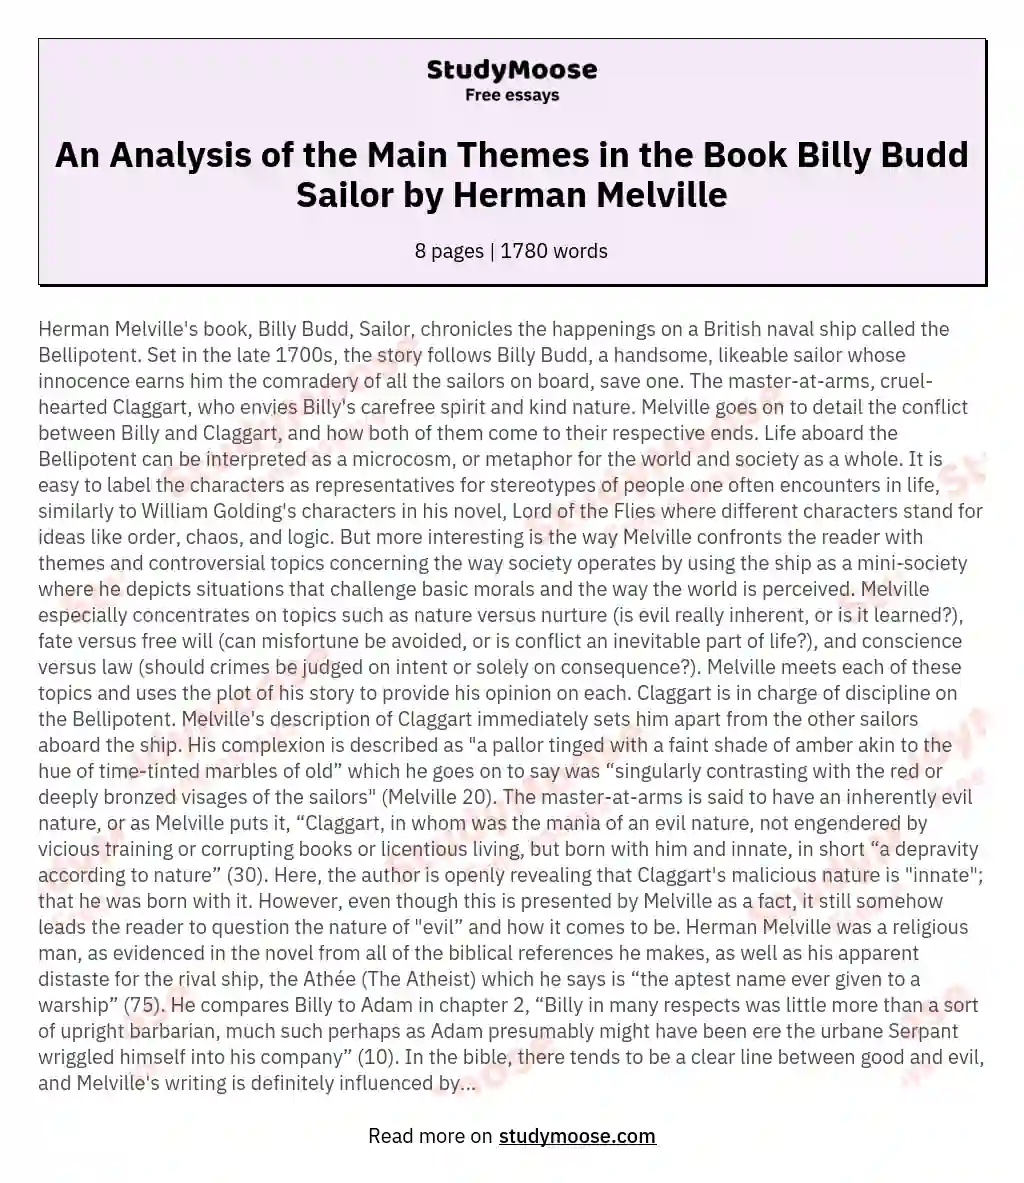 An Analysis of the Main Themes in the Book Billy Budd Sailor by Herman Melville